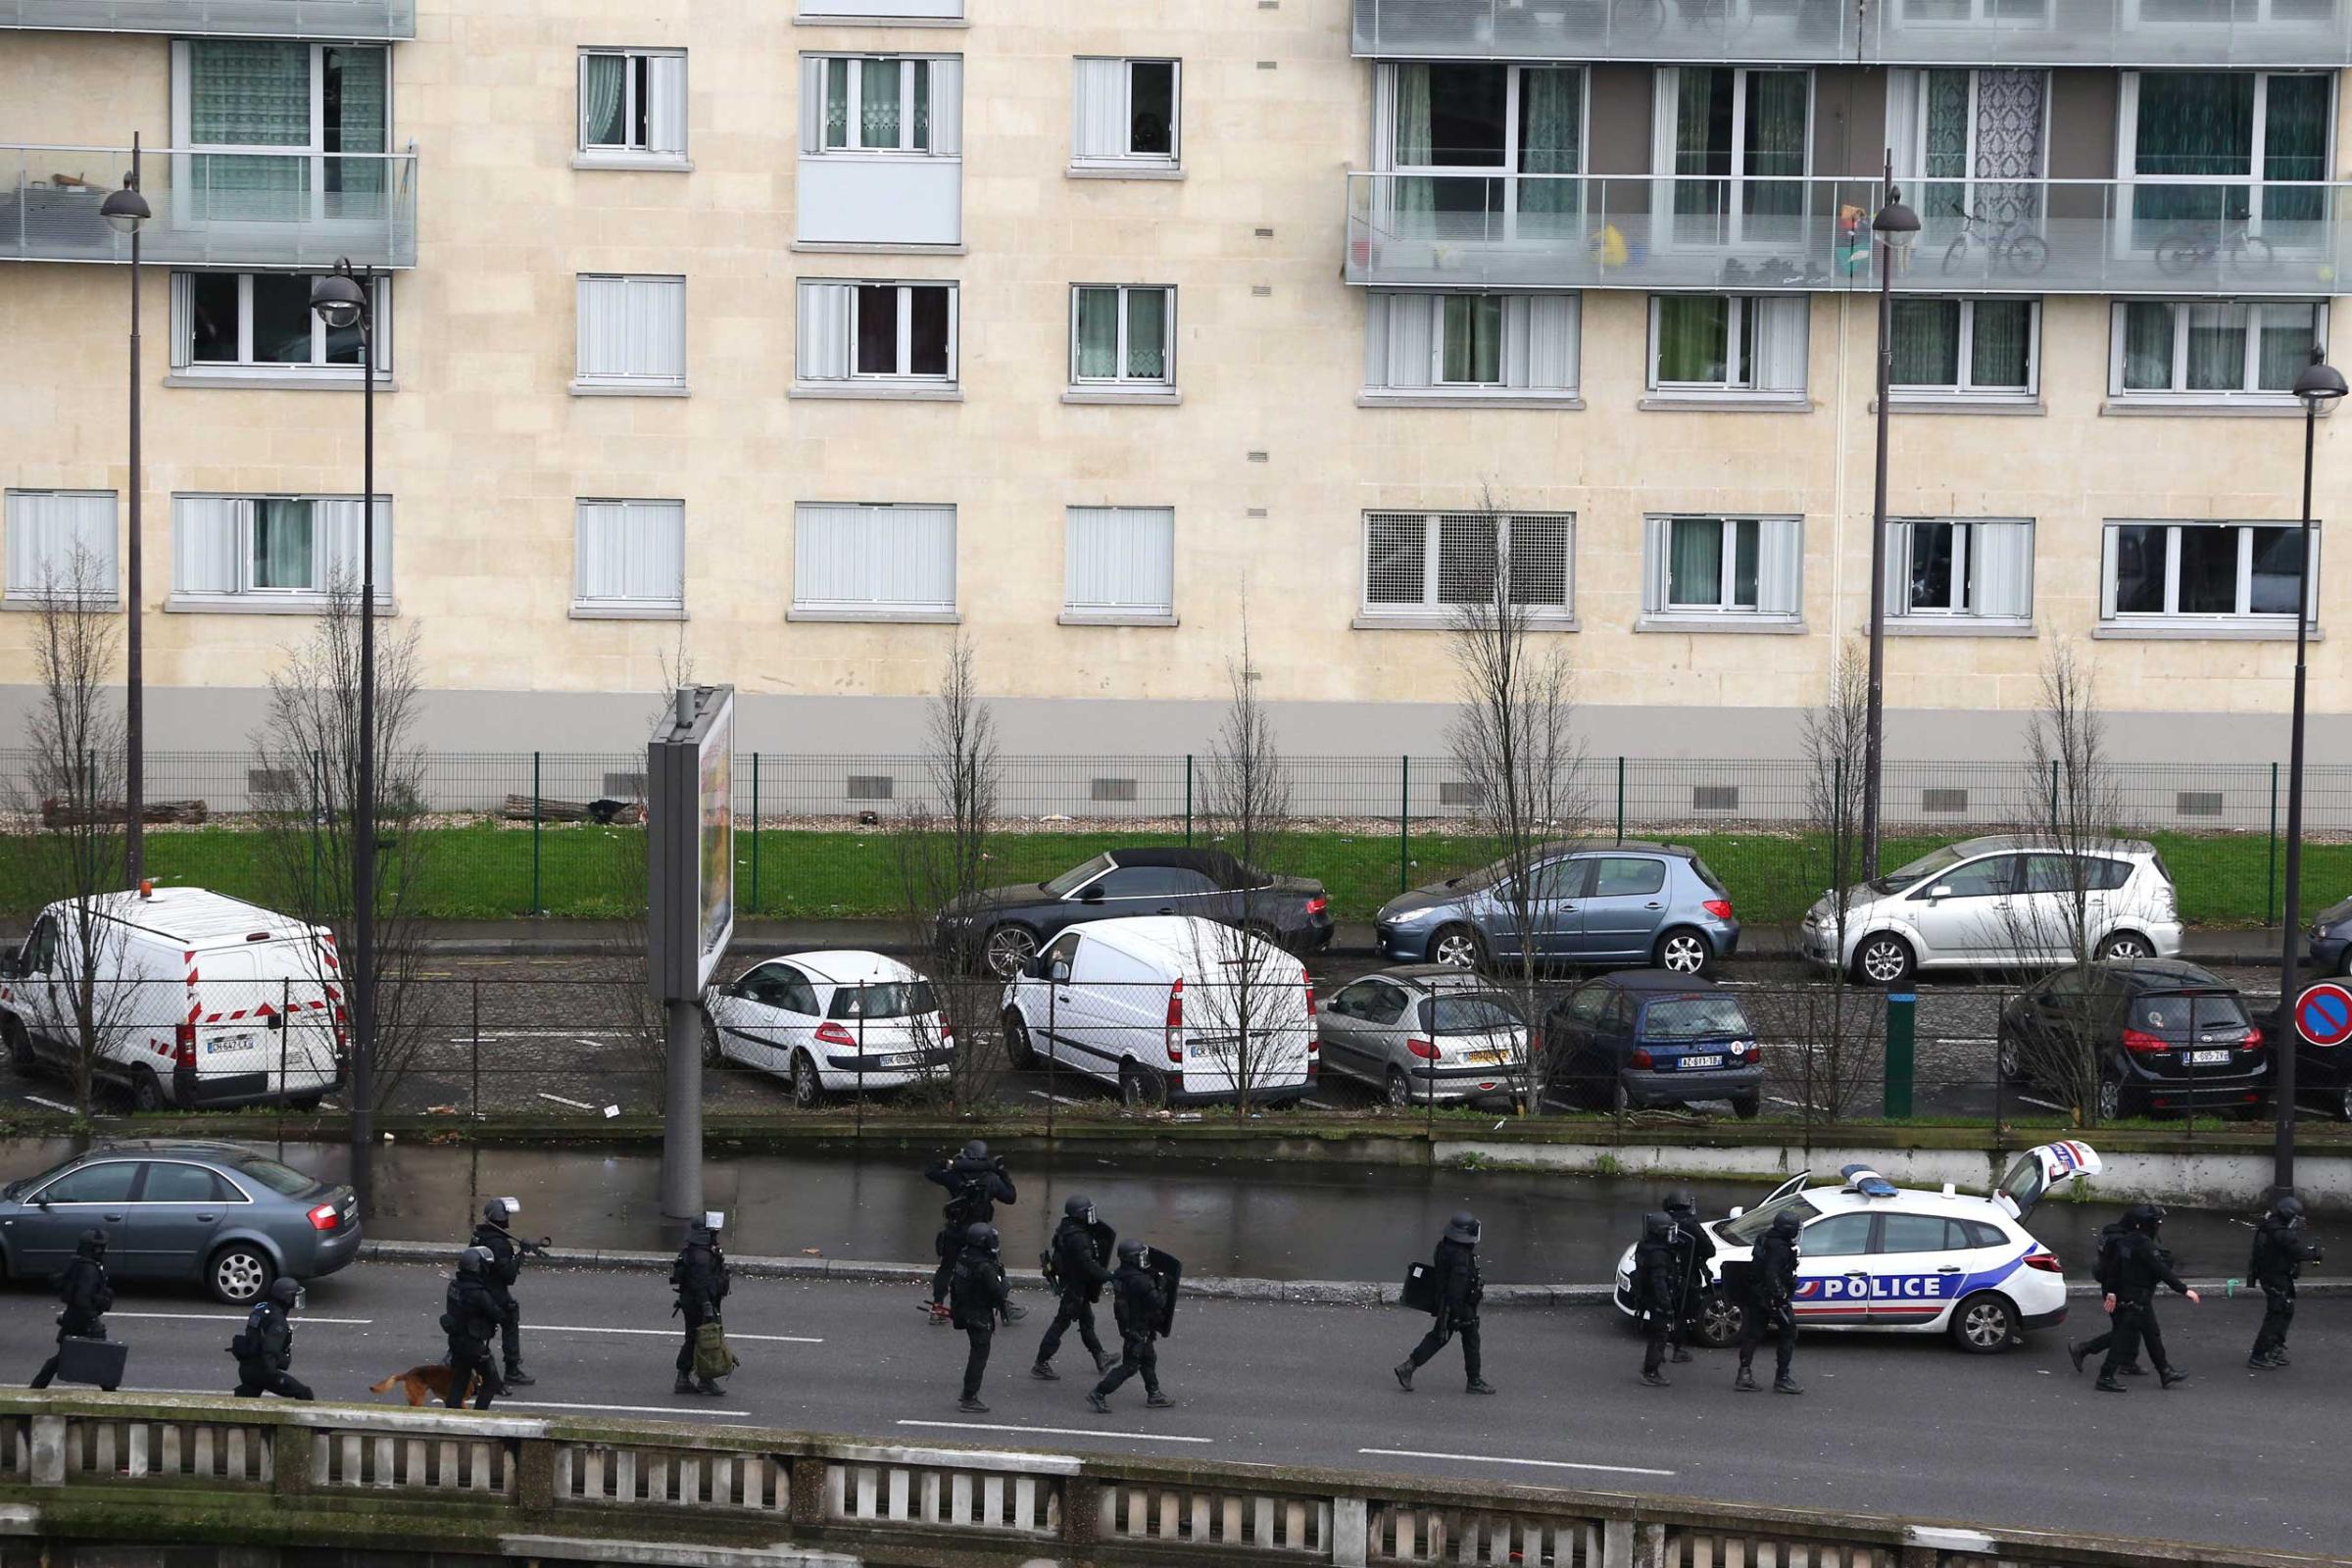 Police mobilize with reports of a hostage situation at Port de Vincennes on Jan. 9, 2015 in Paris.